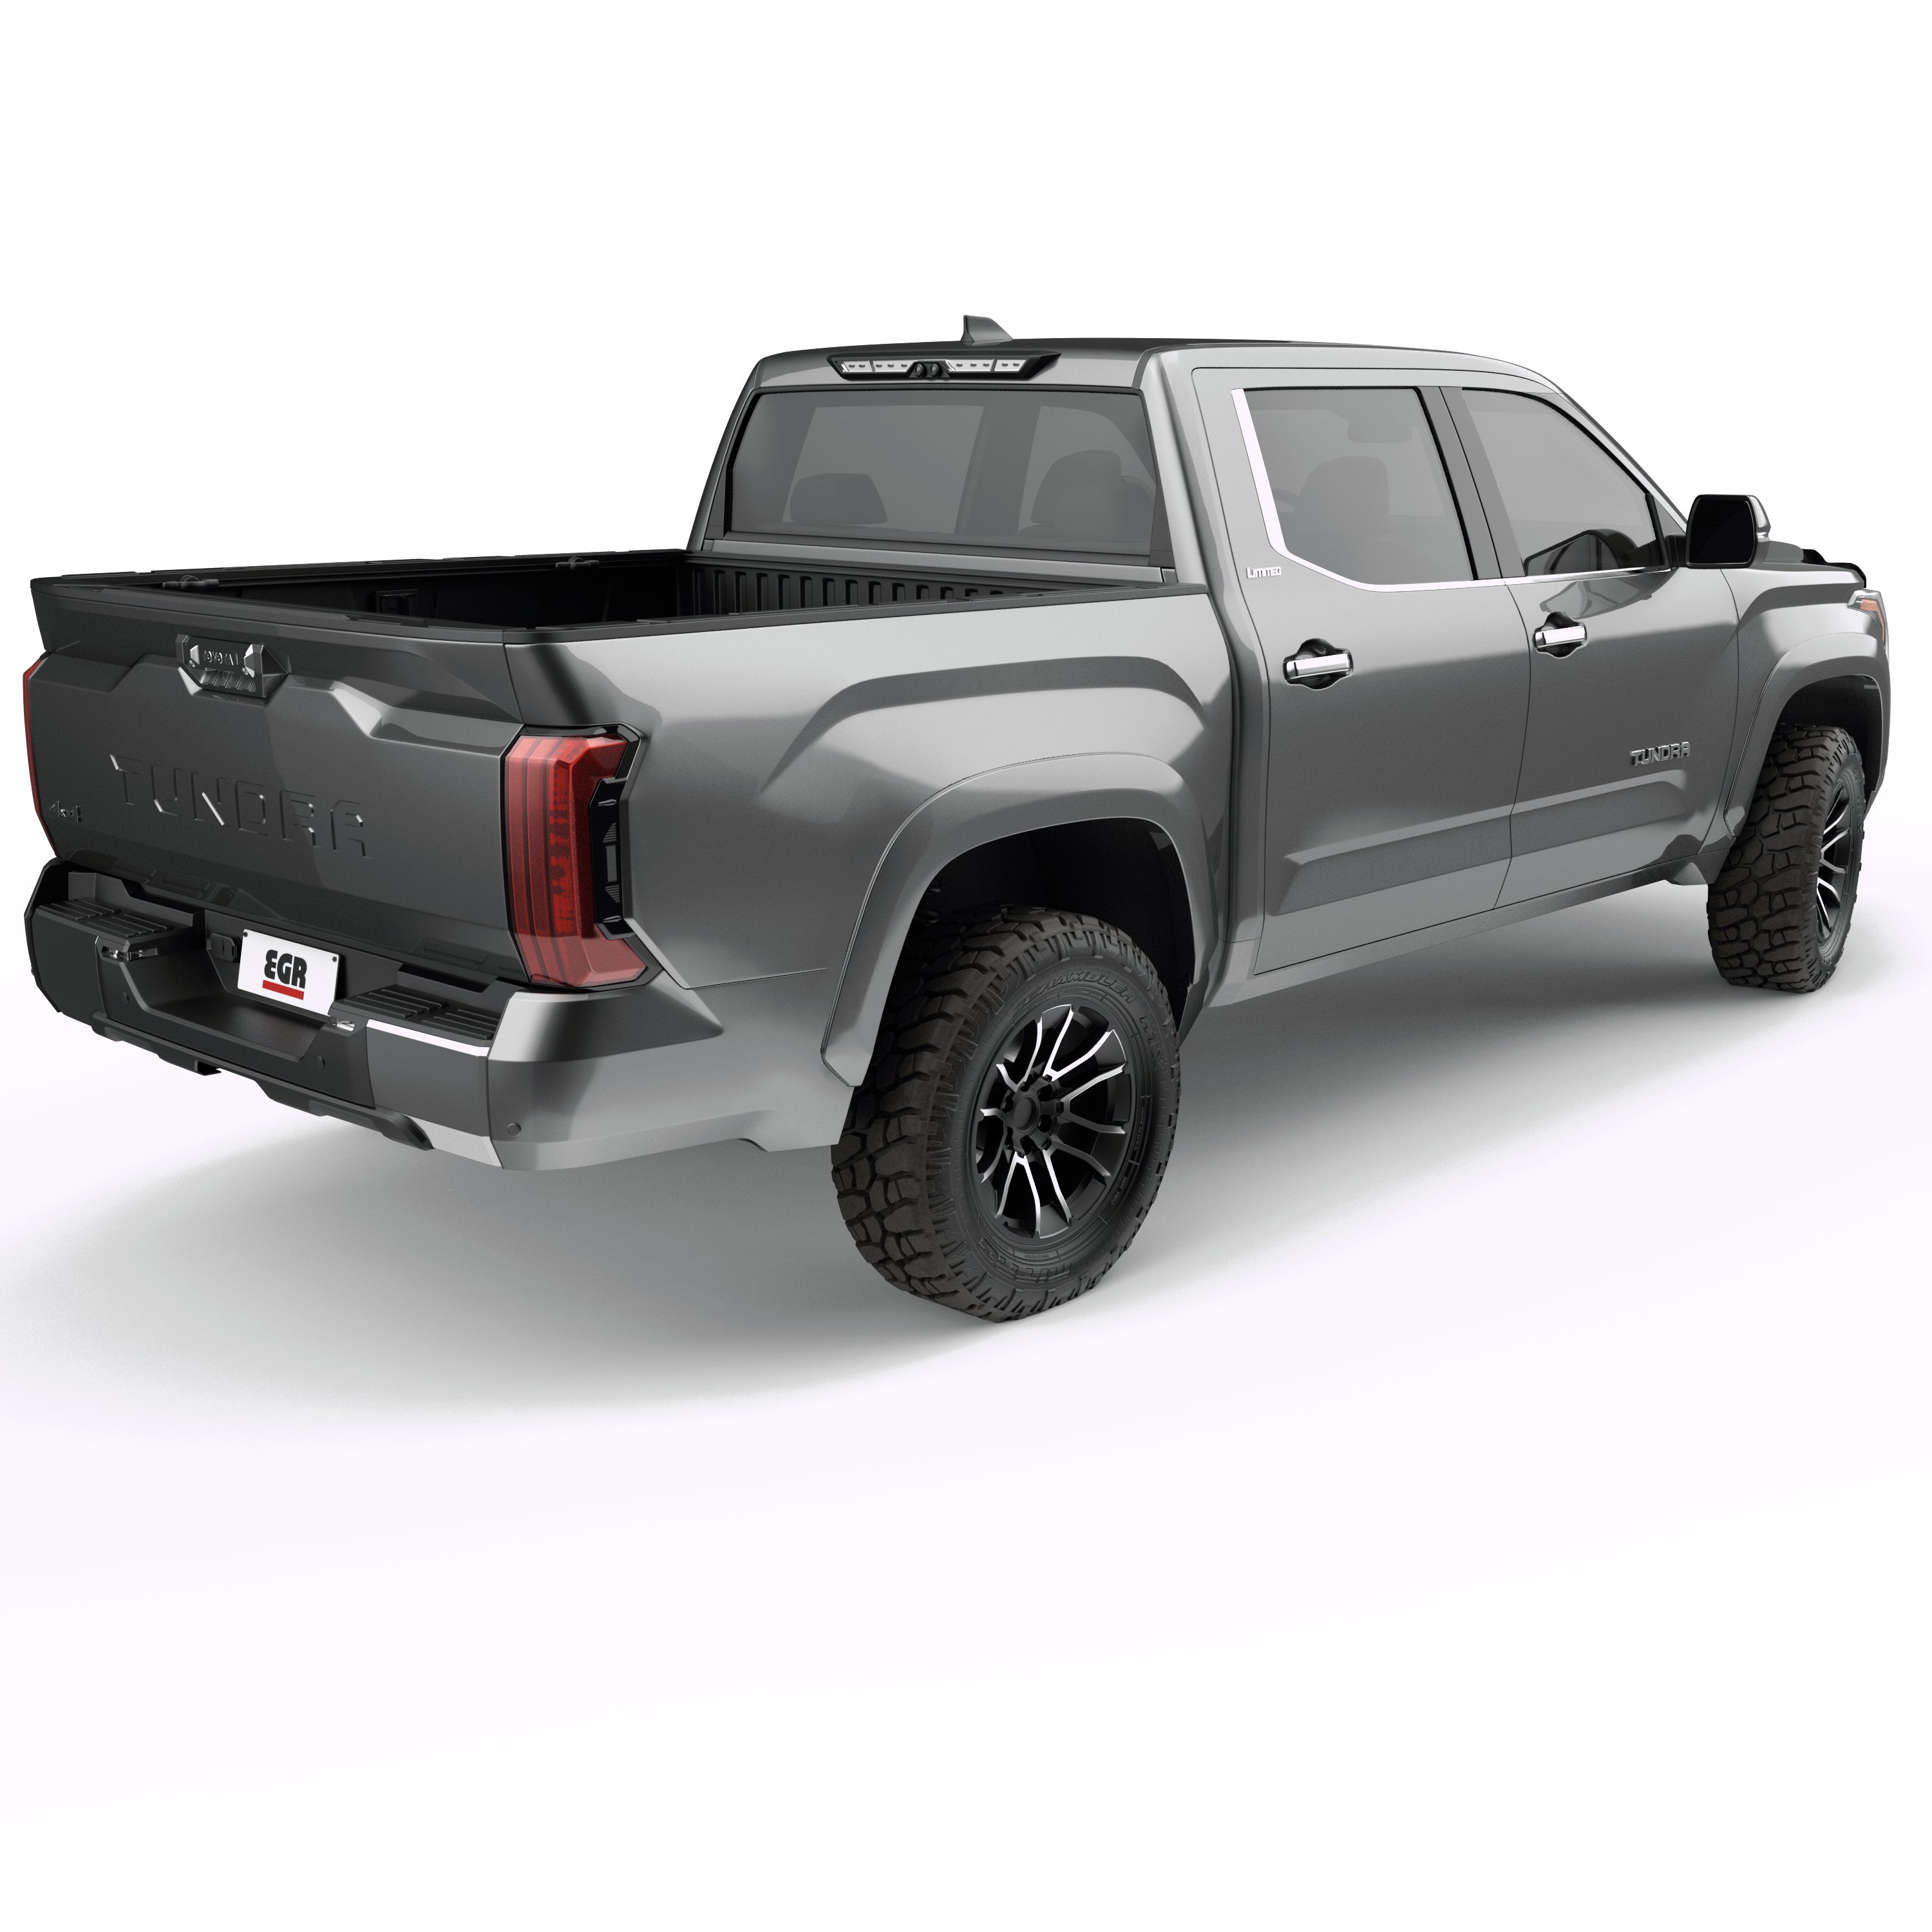 EGR 2022-2024 Toyota Tundra 4 Door Crew Cab Extended Cab Pickup Summit Fender Flares paint to code set of 4 775404-1G3